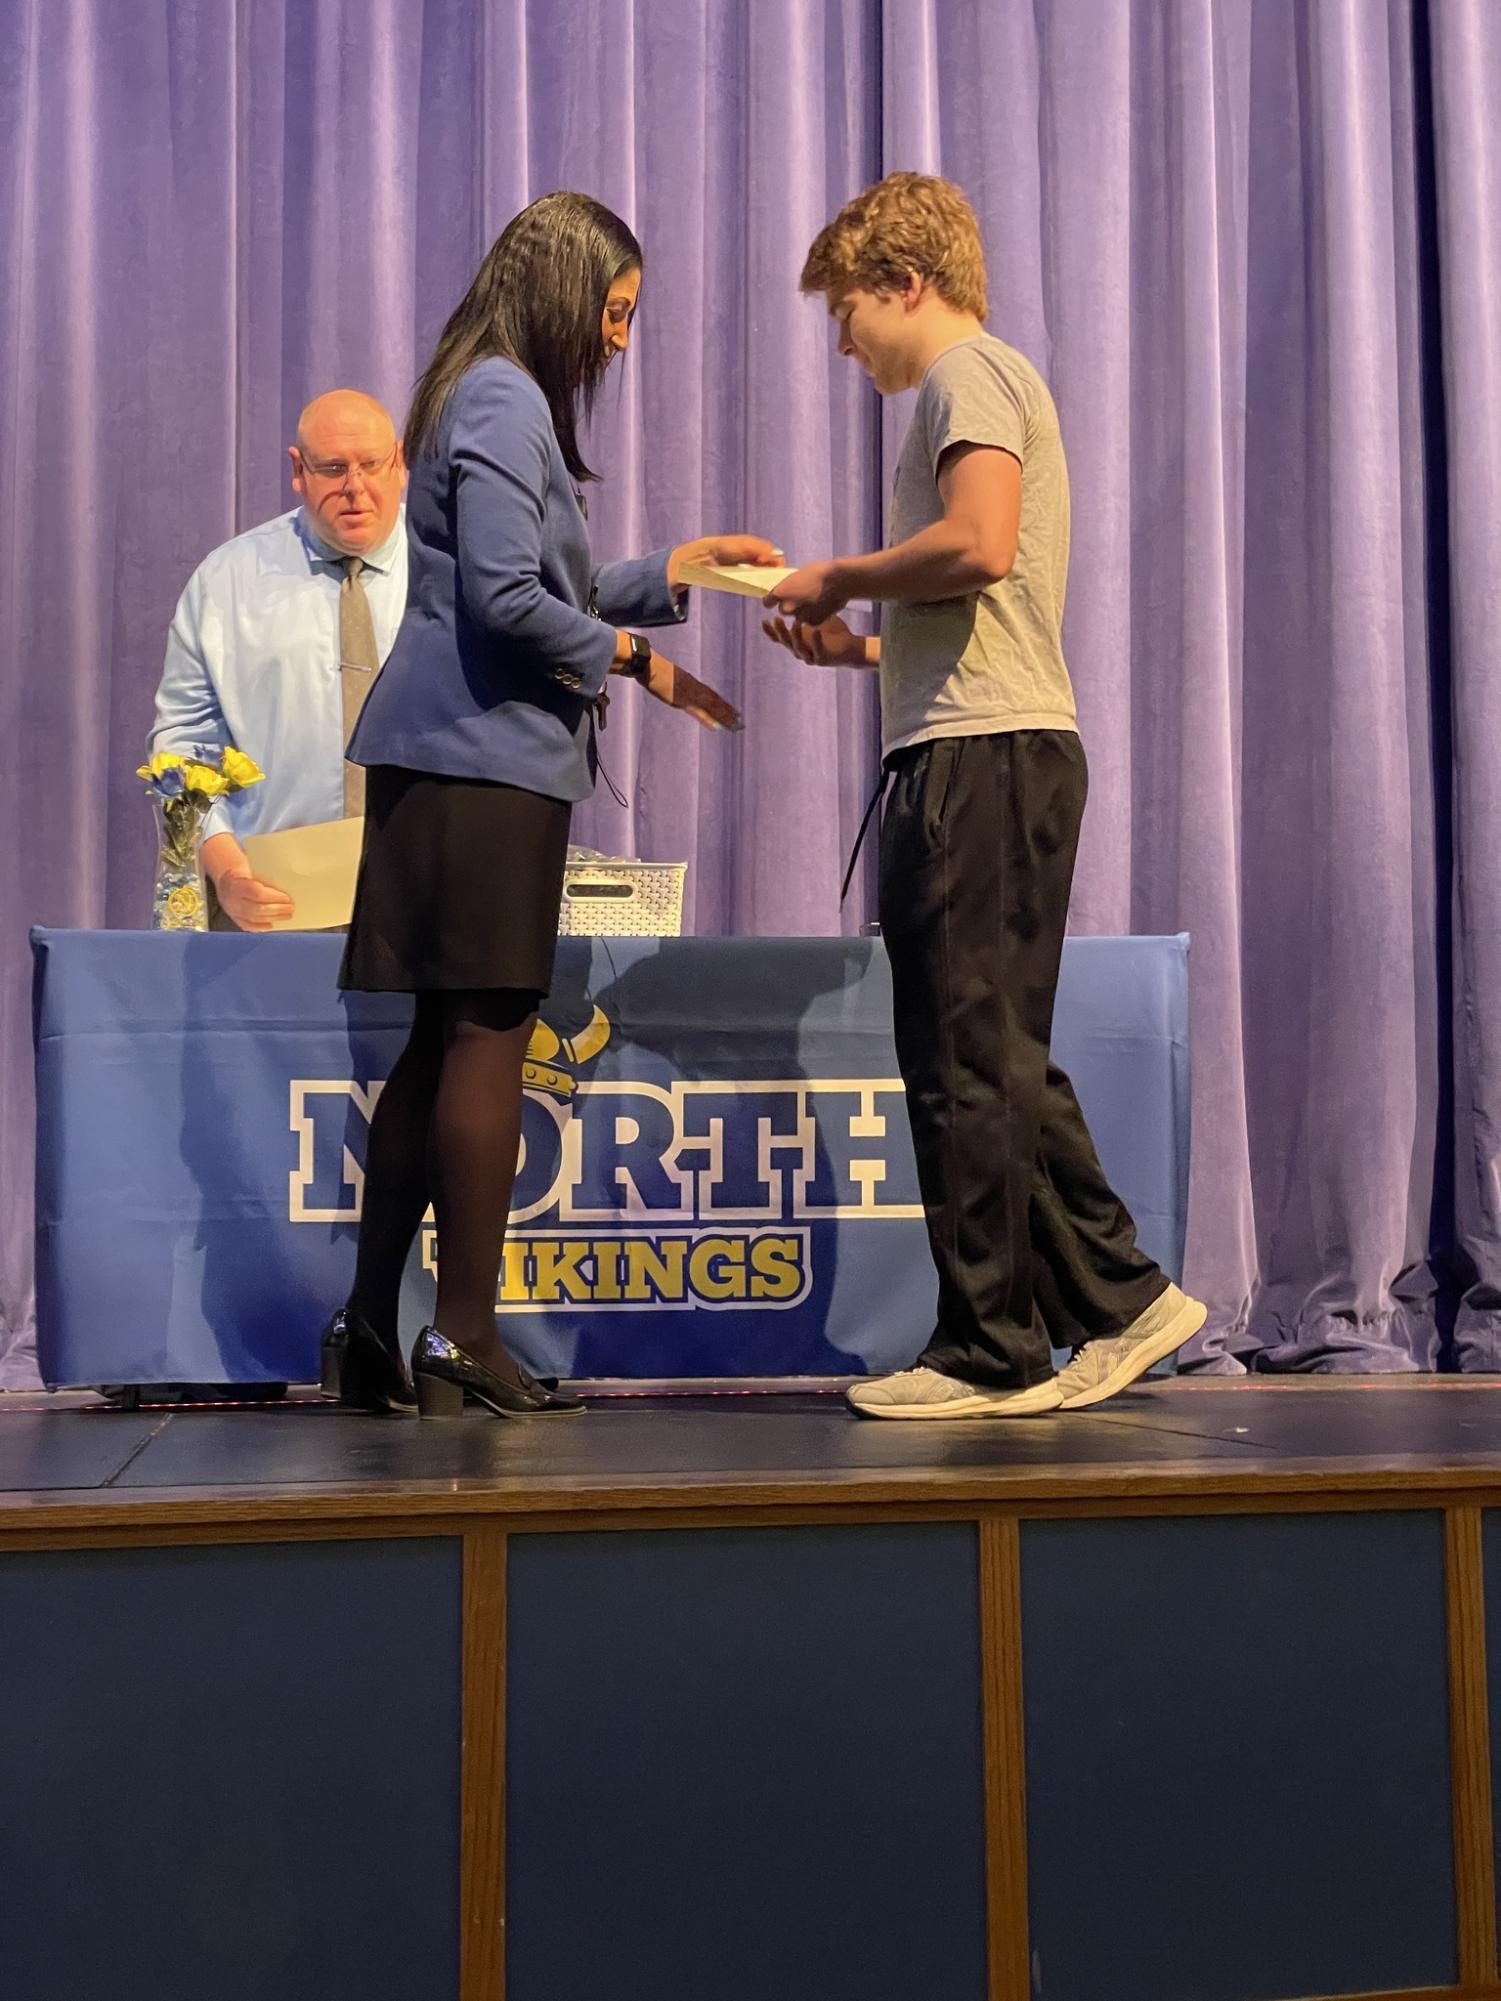 Emerson Schapp, 11, receives his blue and gold award 
PHOTO BY ELIZABETH ANDERSON